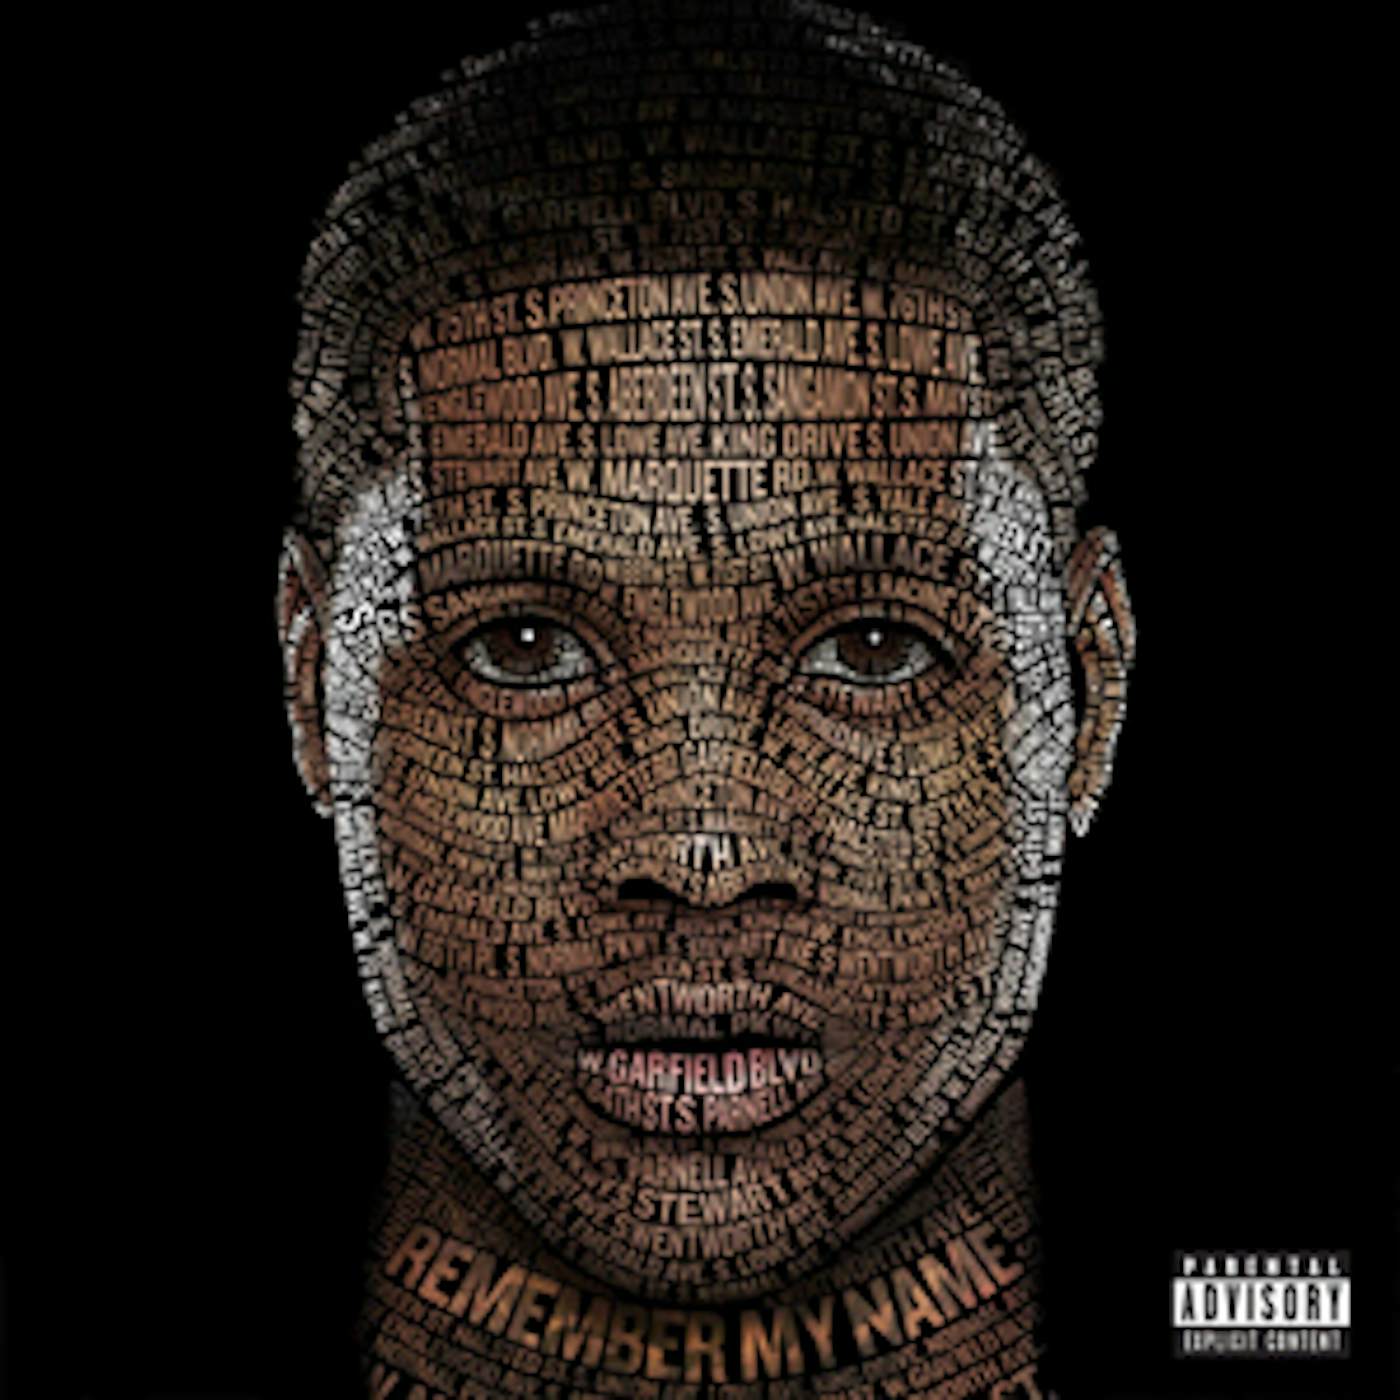 Lil Durk Remember My Name Vinyl Record